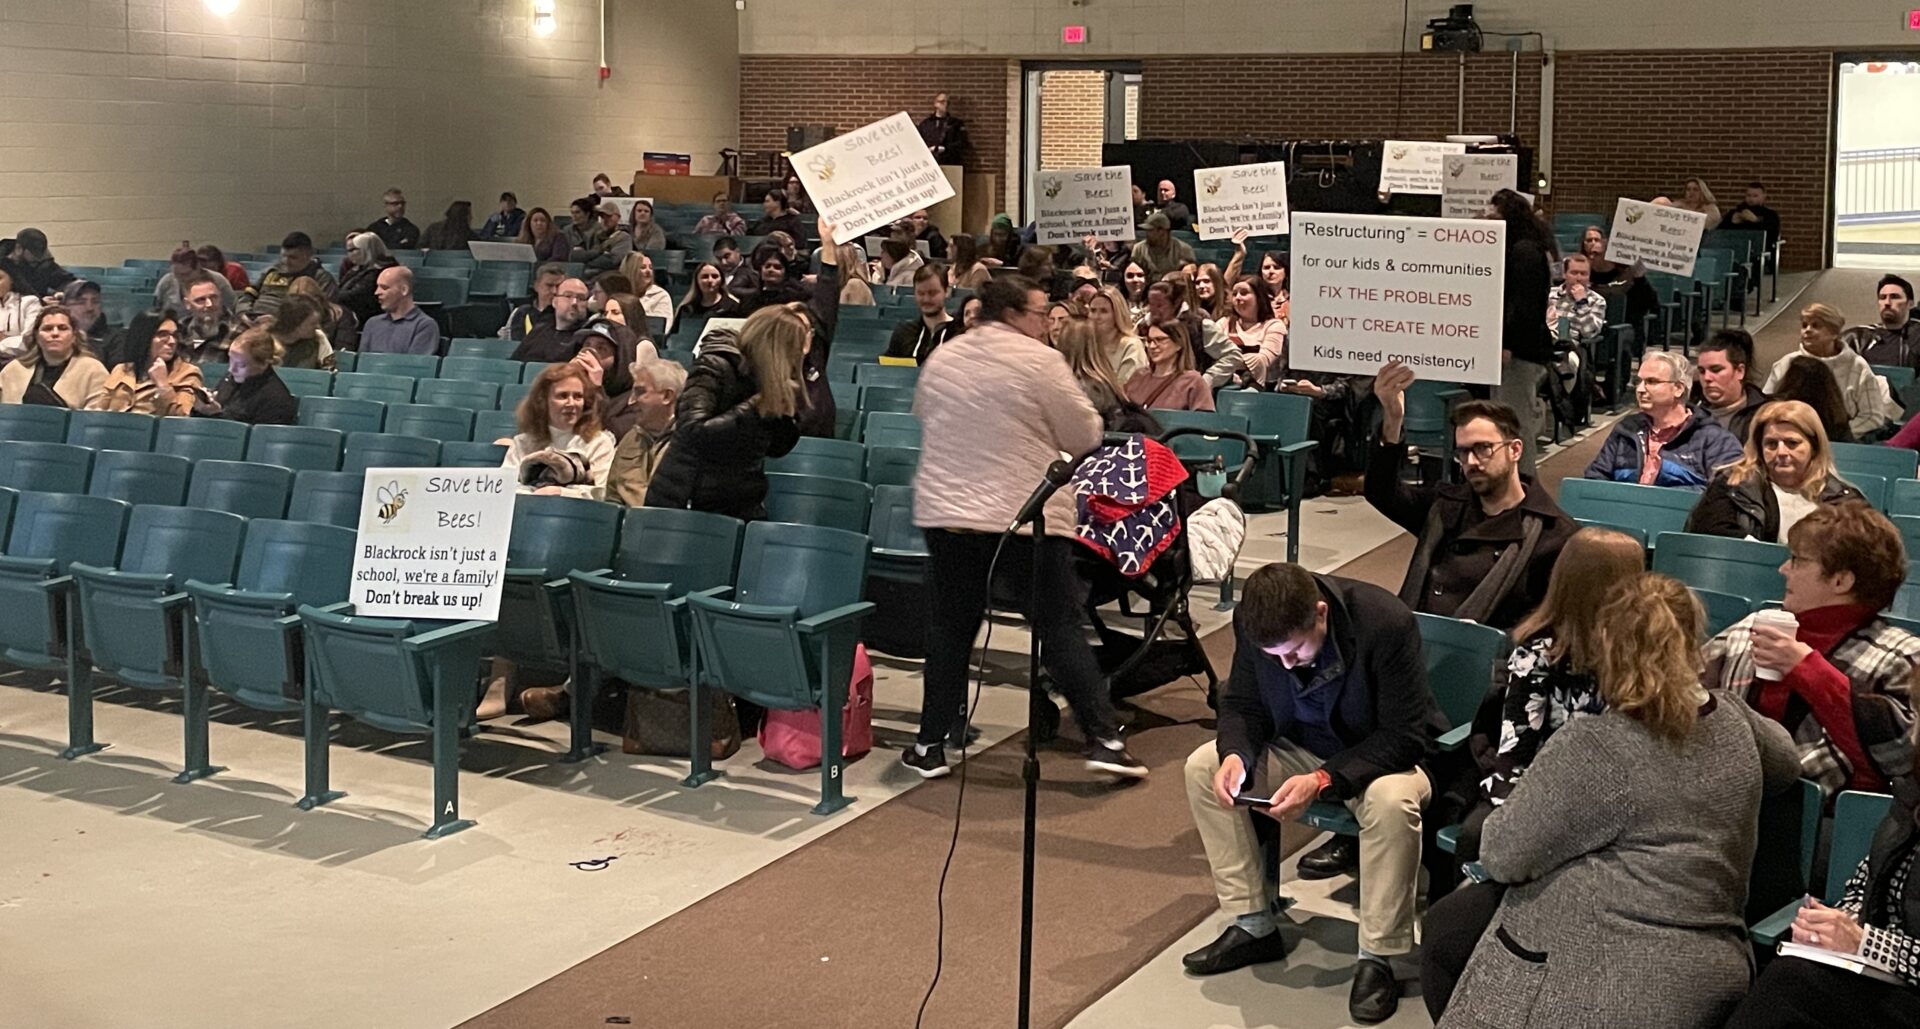 [CREDIT: Rob Borkowski] Parents, students and teachers crowded Allan Shawn Feinstein Middle School's auditorium Jan. 11 to oppose a Coventry schools restructure plan that would convert Black Rock Elementary School to an early learning center, reorganizing the remaining elementary schools. 